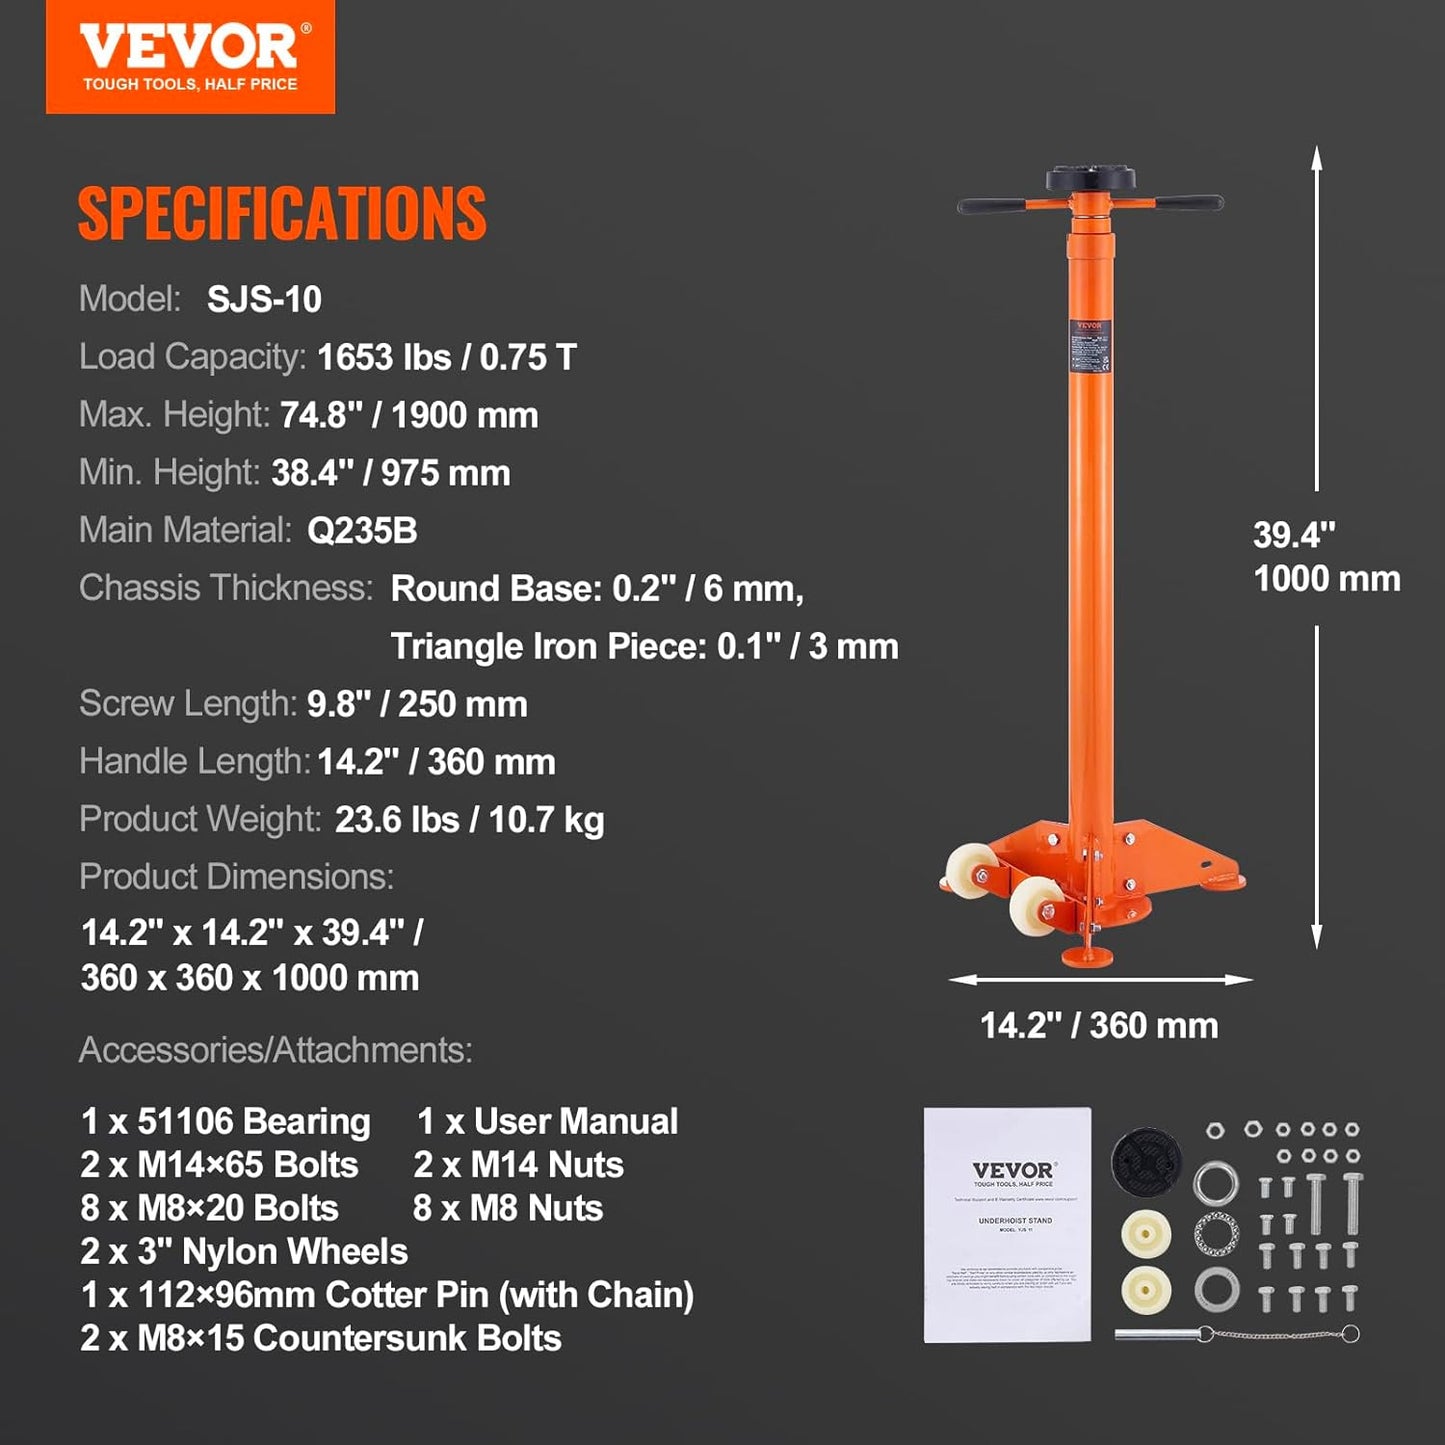 VEVOR SJS-10 Underhoist, Lifting from 38.4" to 74.8" 3\/4 Ton Capacity Under Hoist Jack Stand, Bearing Mounted Spin Handle, Two Wheels, Self-Locking Threaded Screw, Support Vehicle Components, Orange